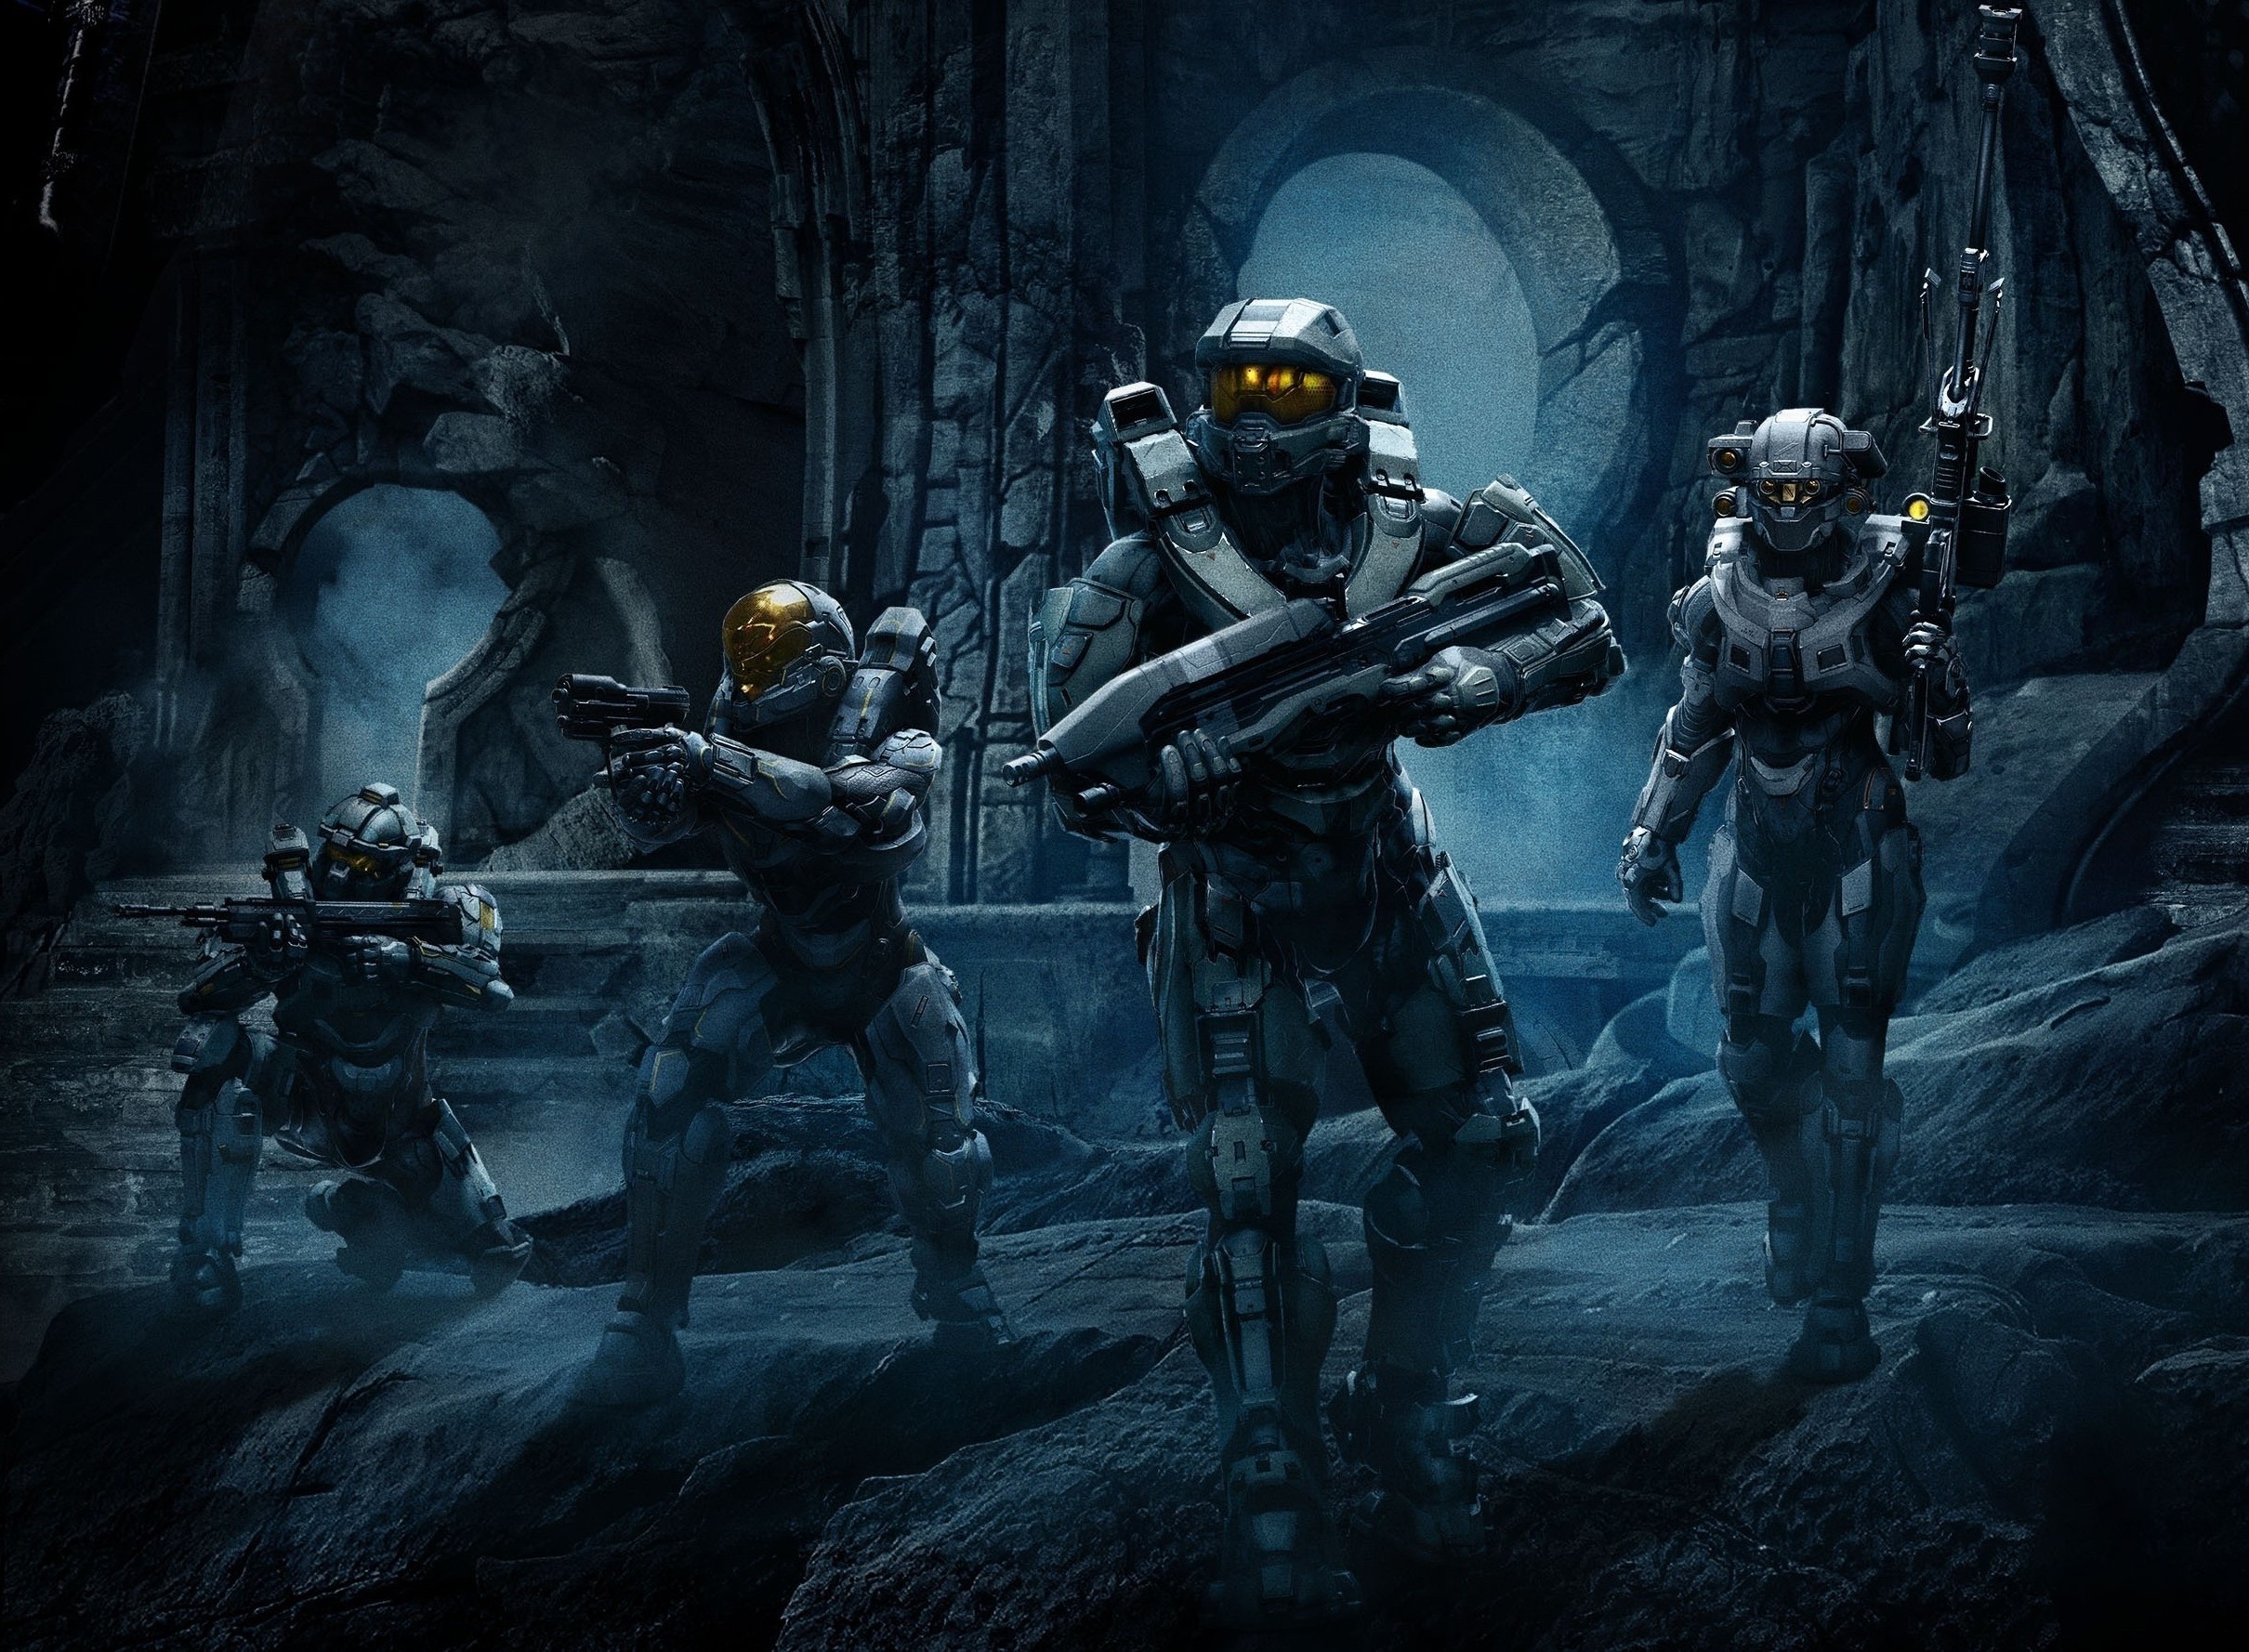 Halo 5, Halo, Shooter, Video Games, Master Chief, Spartans, Blue Team, Kelly 087, Fred 104, Linda 058 Wallpaper